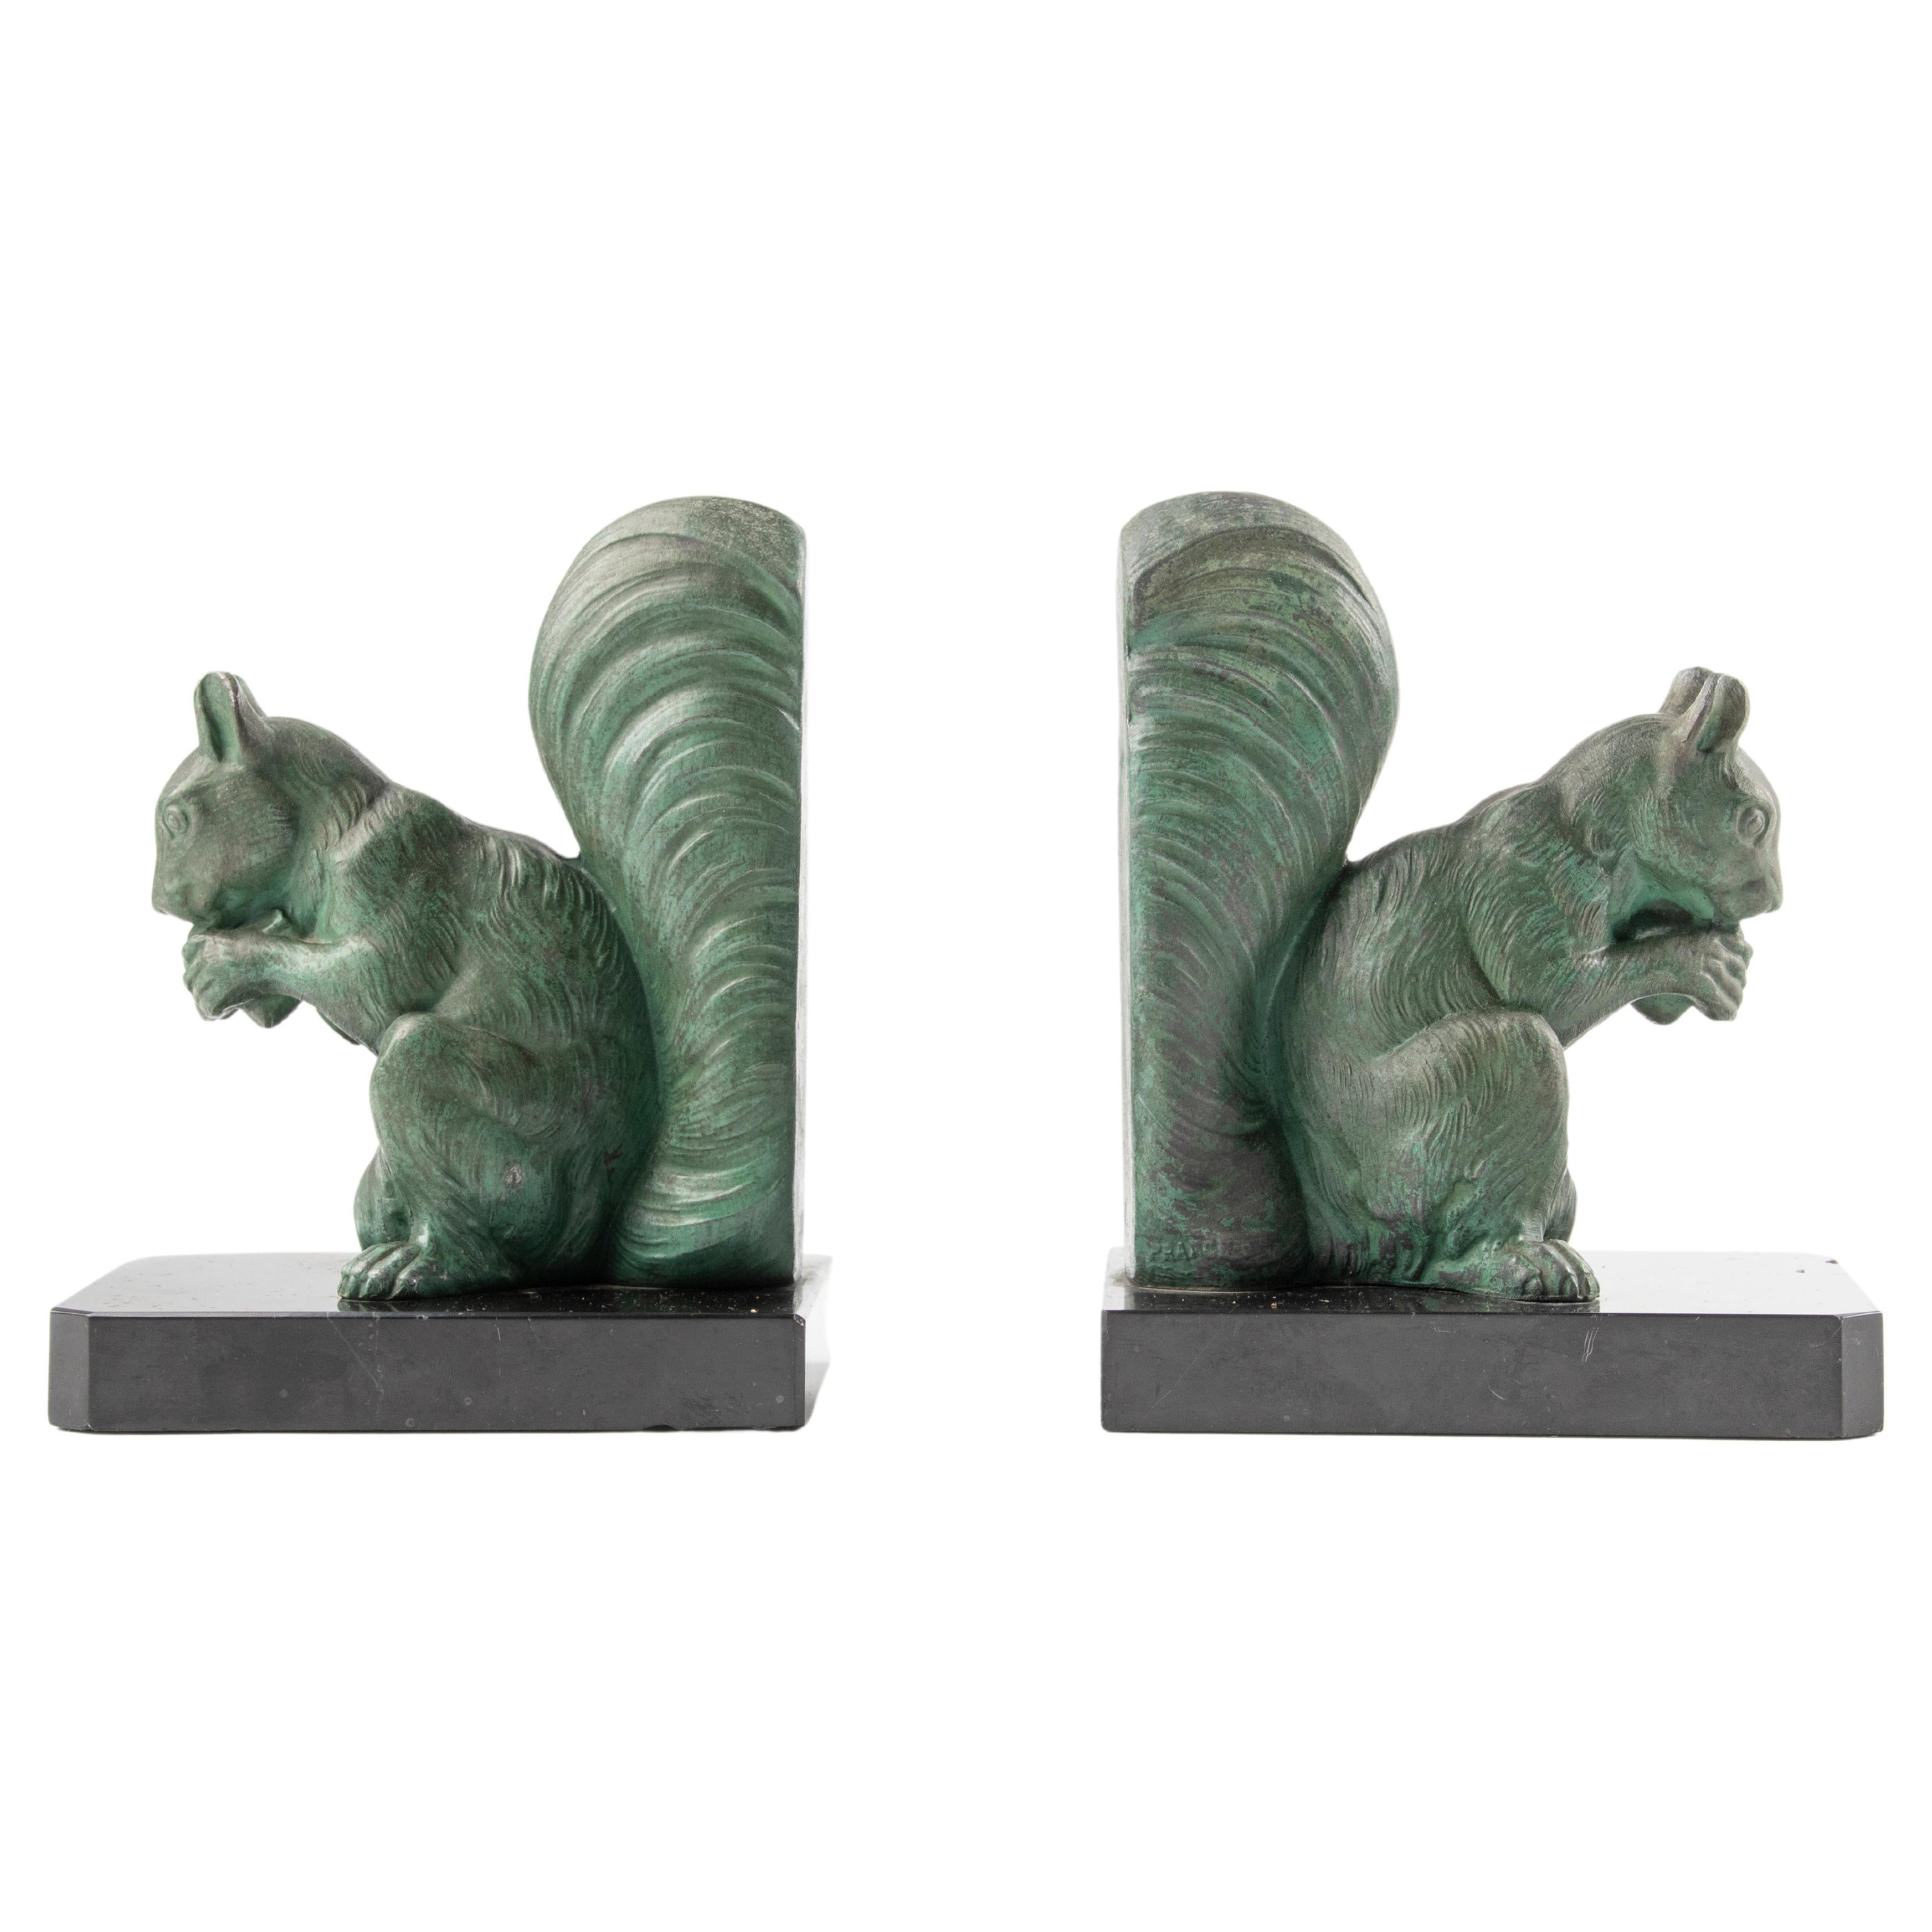 Early 20th Century Art Deco Spelter Bookends with Squirrels